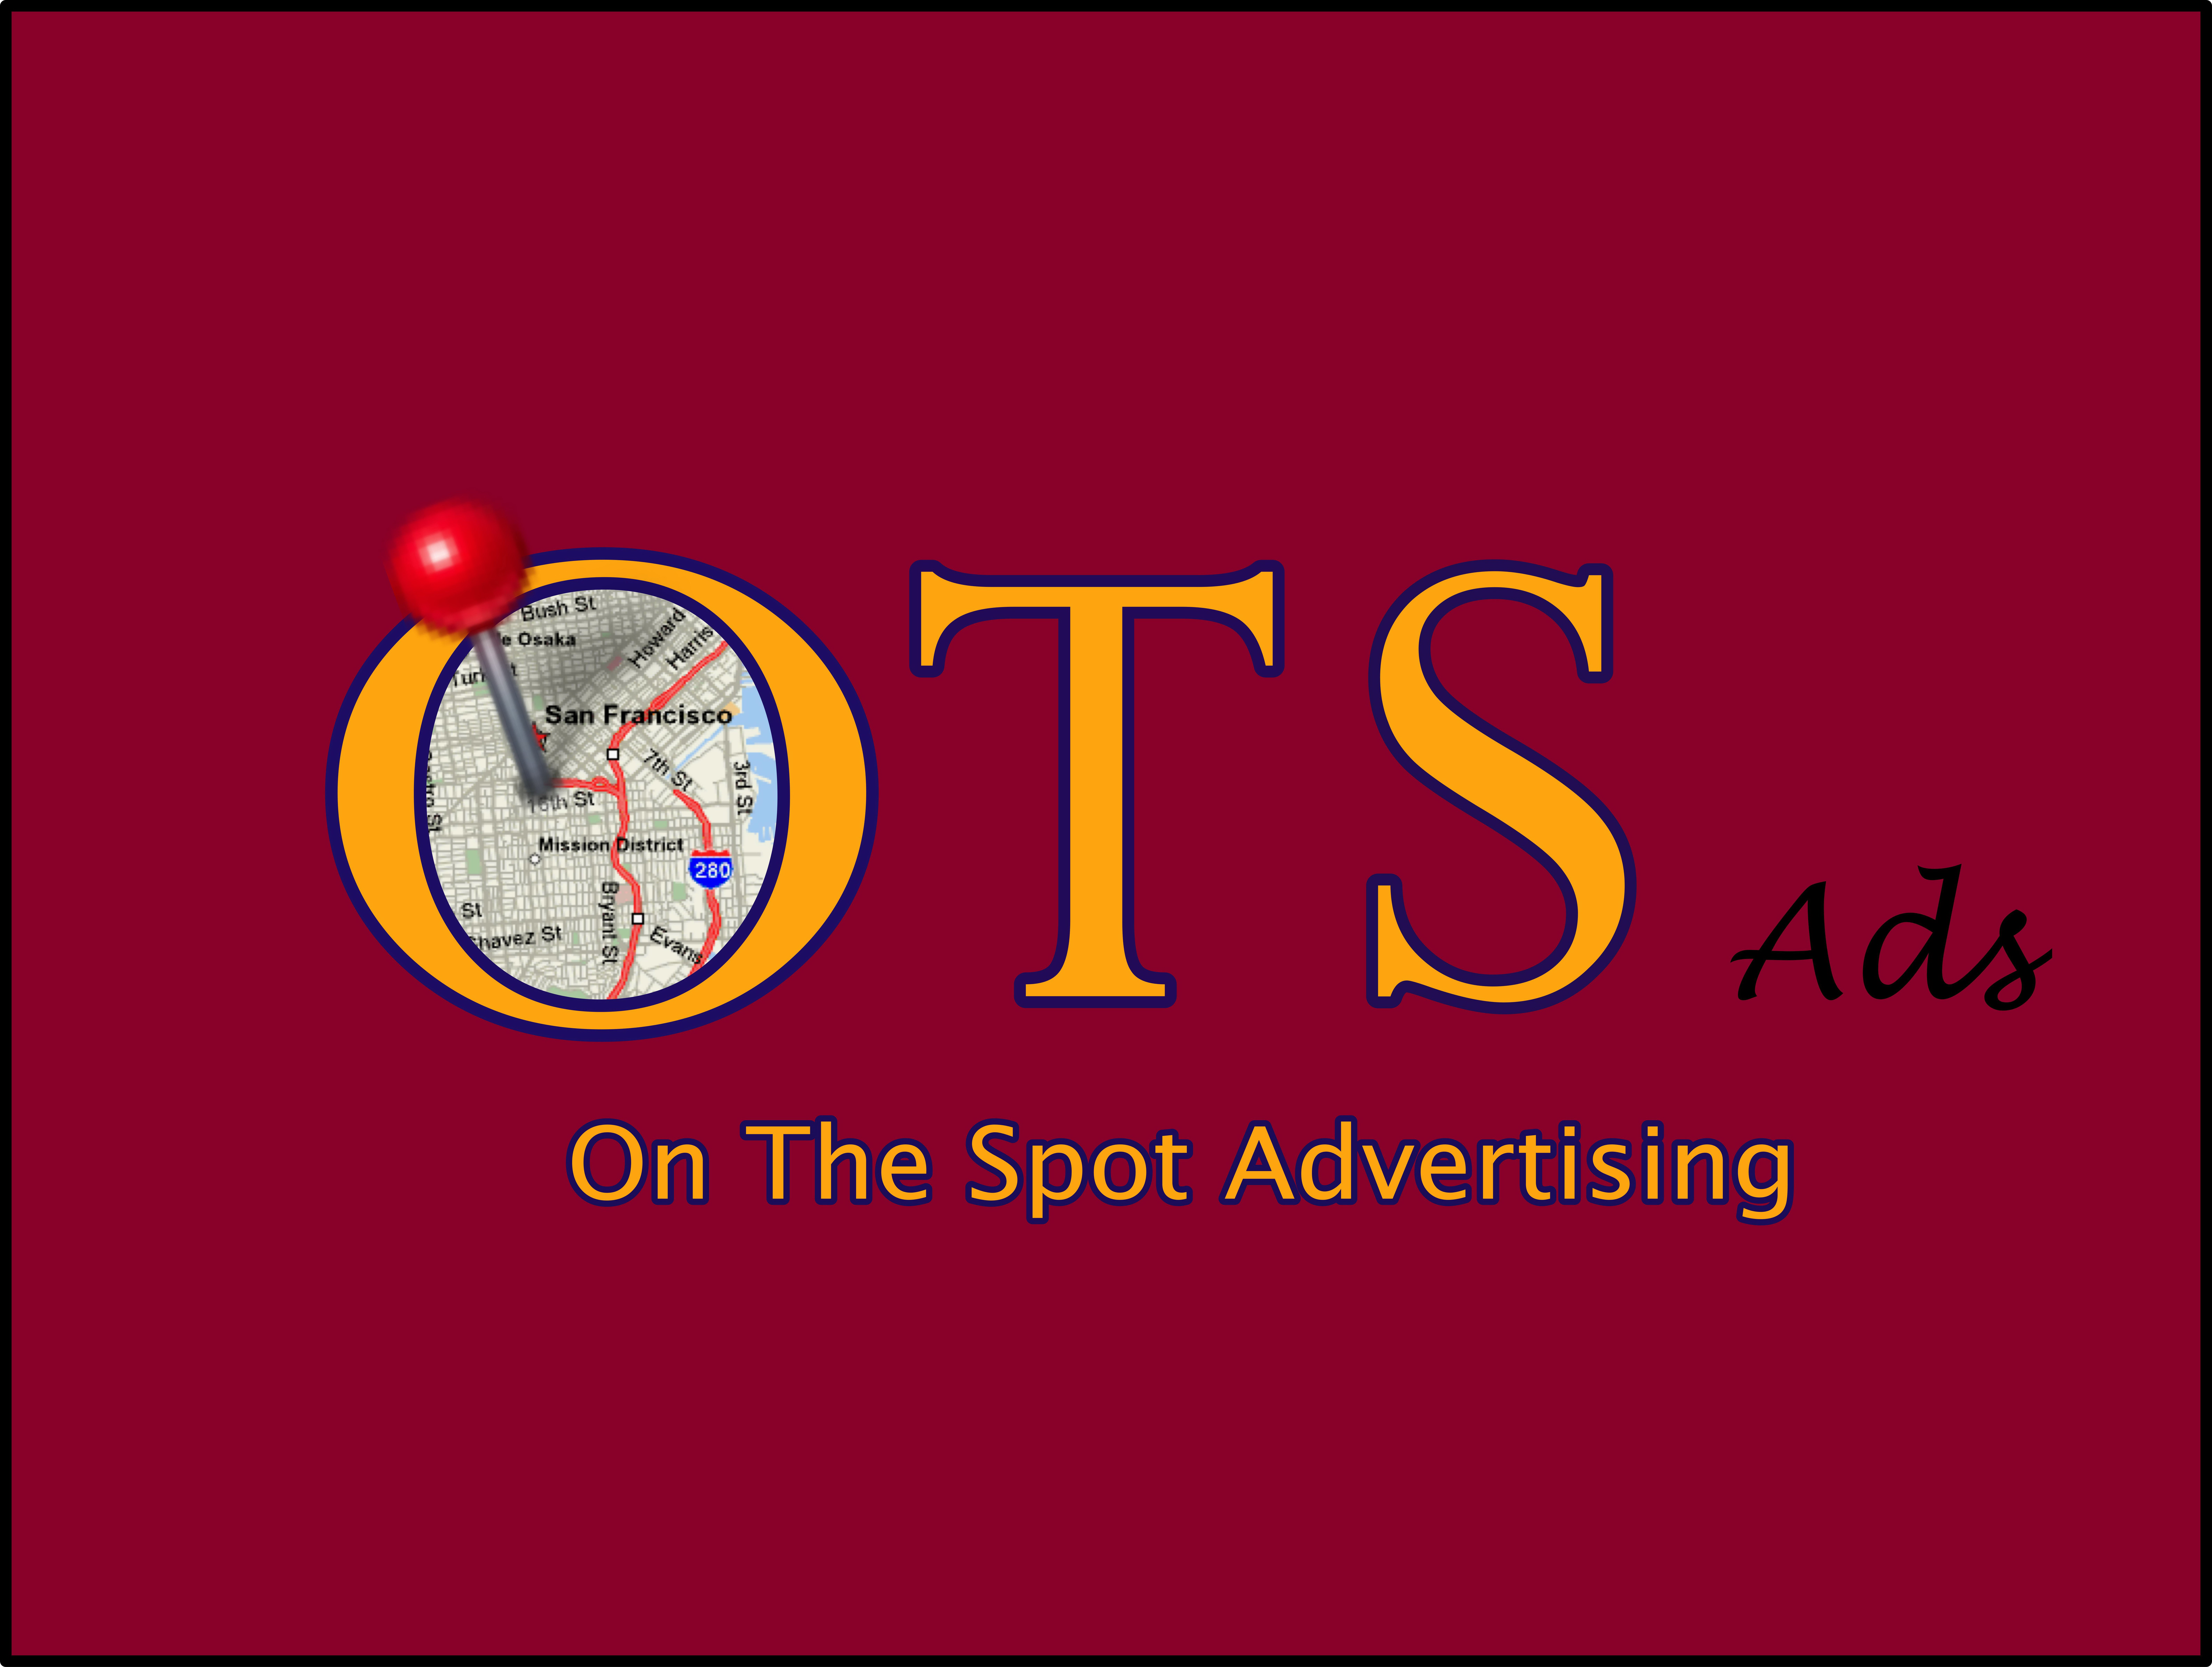 OTS ADS, ON THE SPOT ADVERTISING